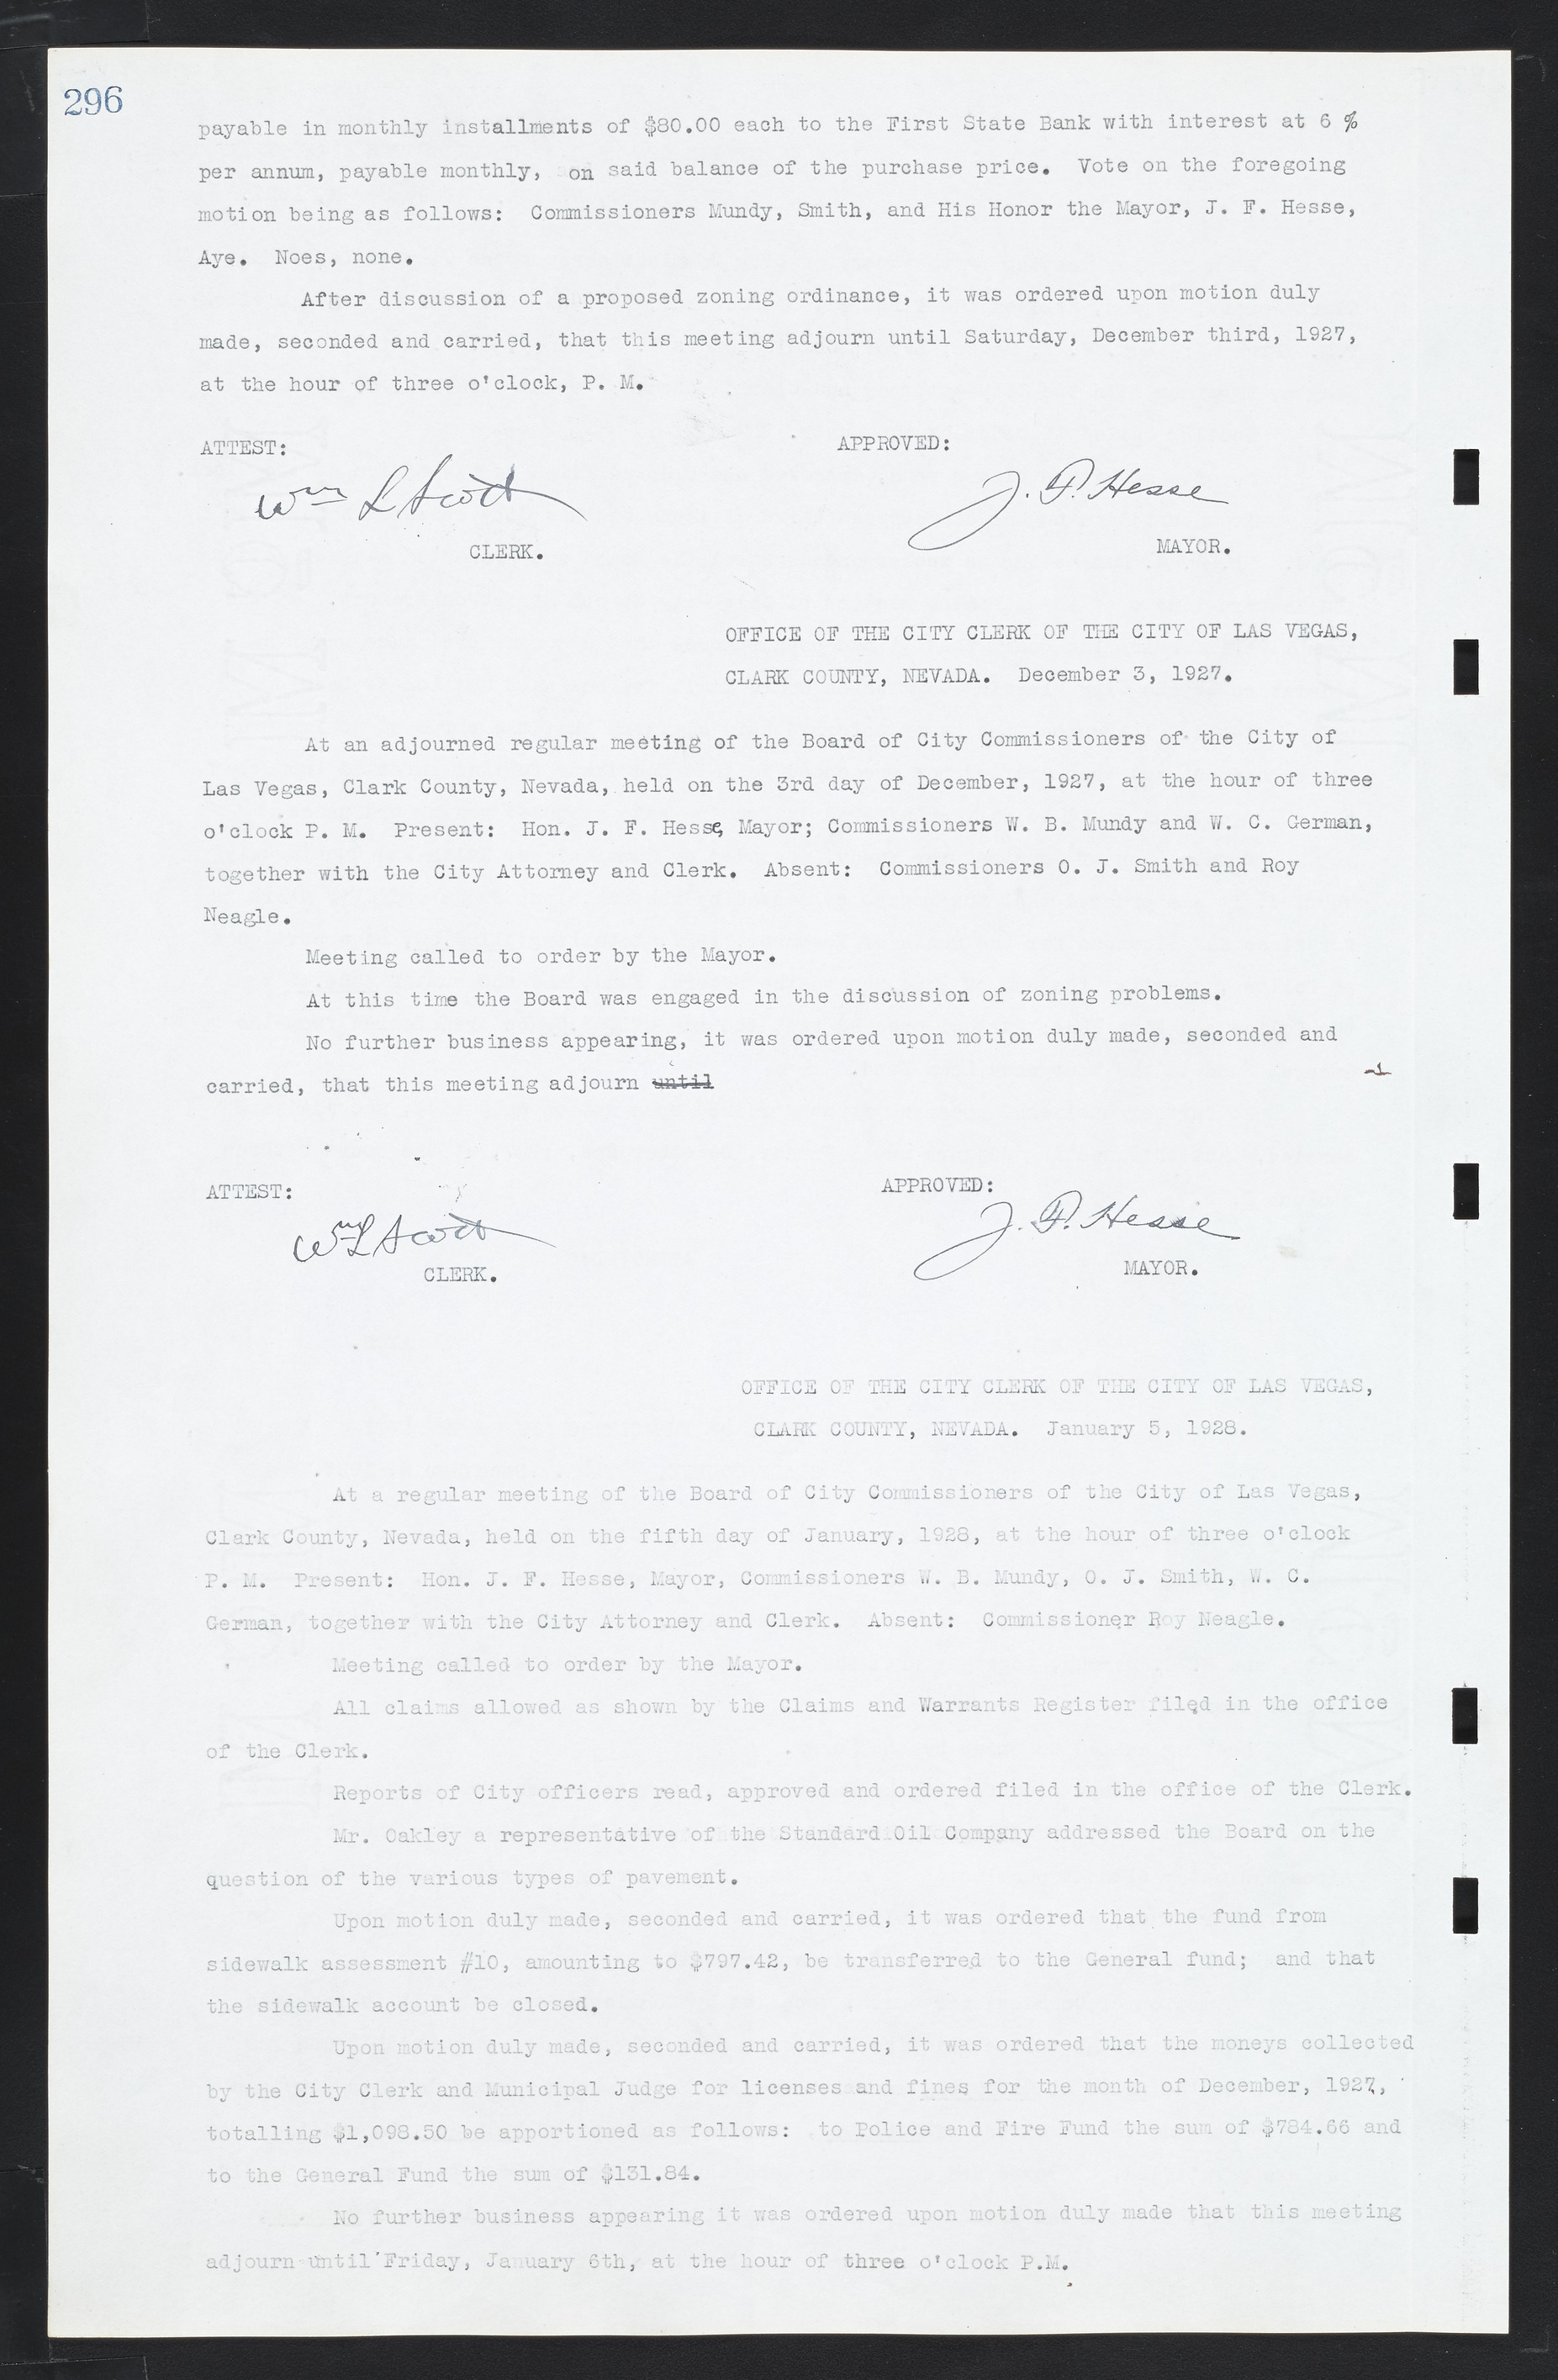 Las Vegas City Commission Minutes, March 1, 1922 to May 10, 1929, lvc000002-305